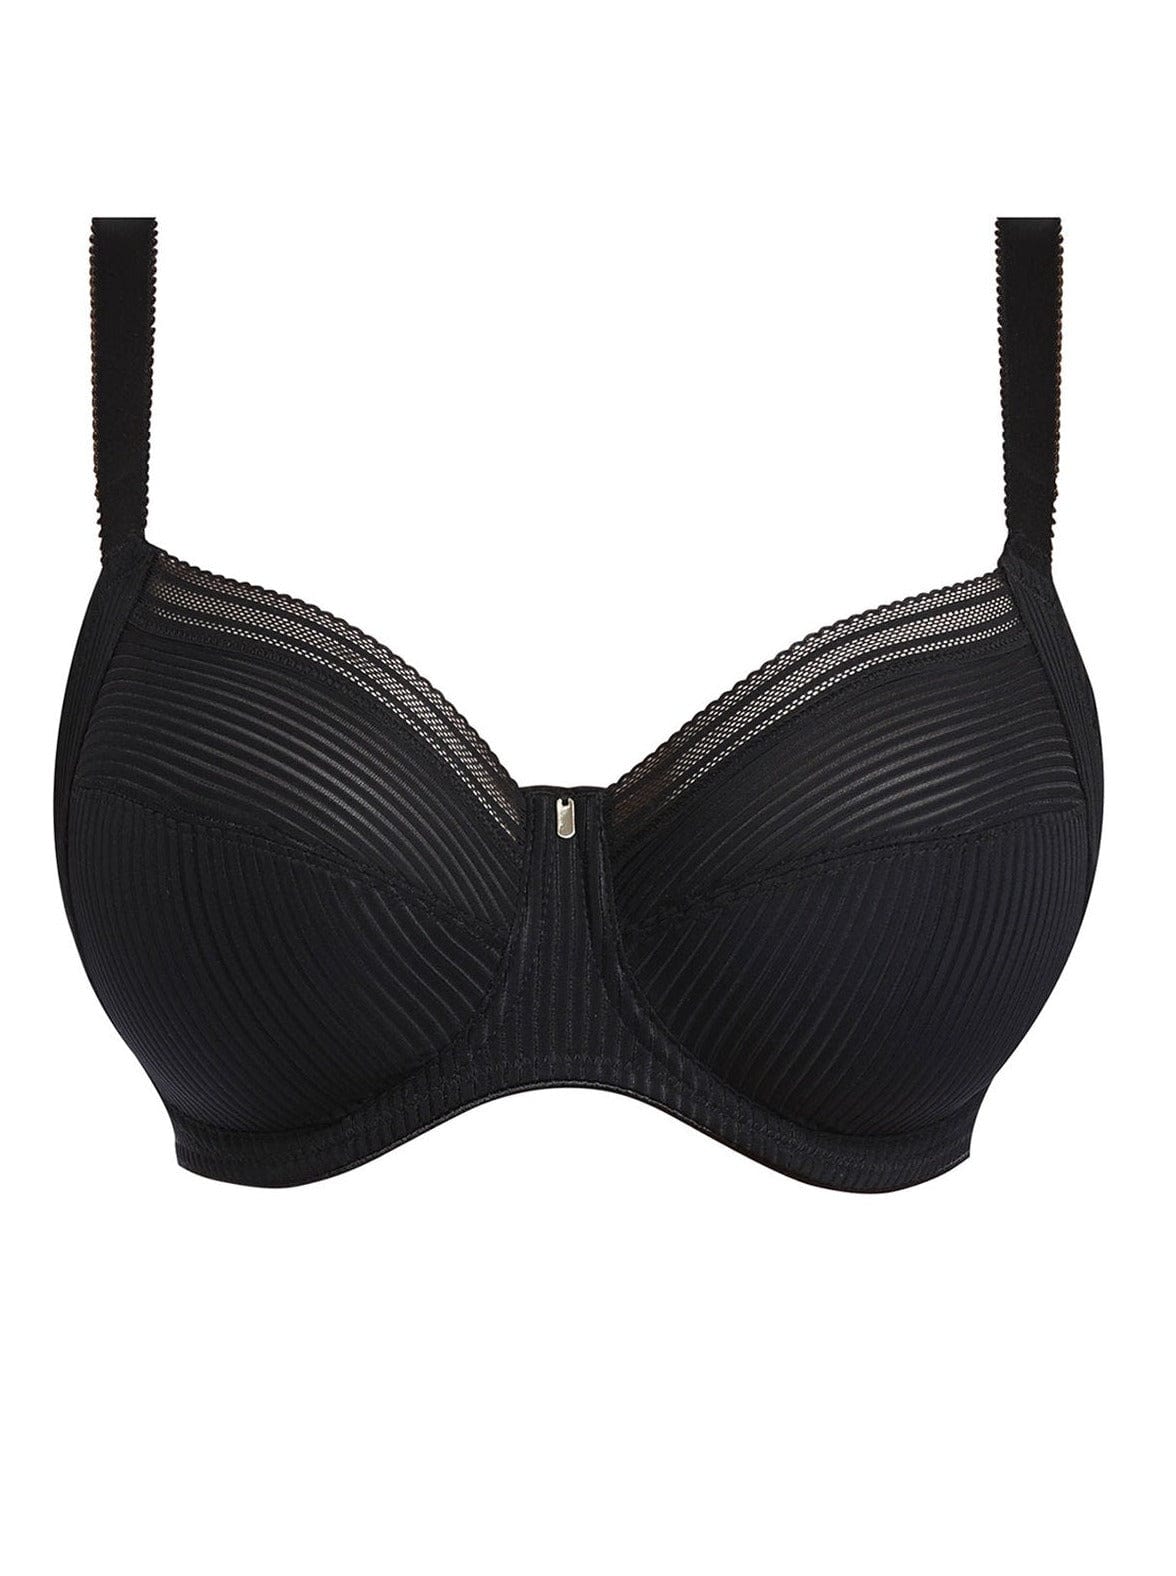 Fusion Full Cup Side Support Bra - Black - Chérie Amour